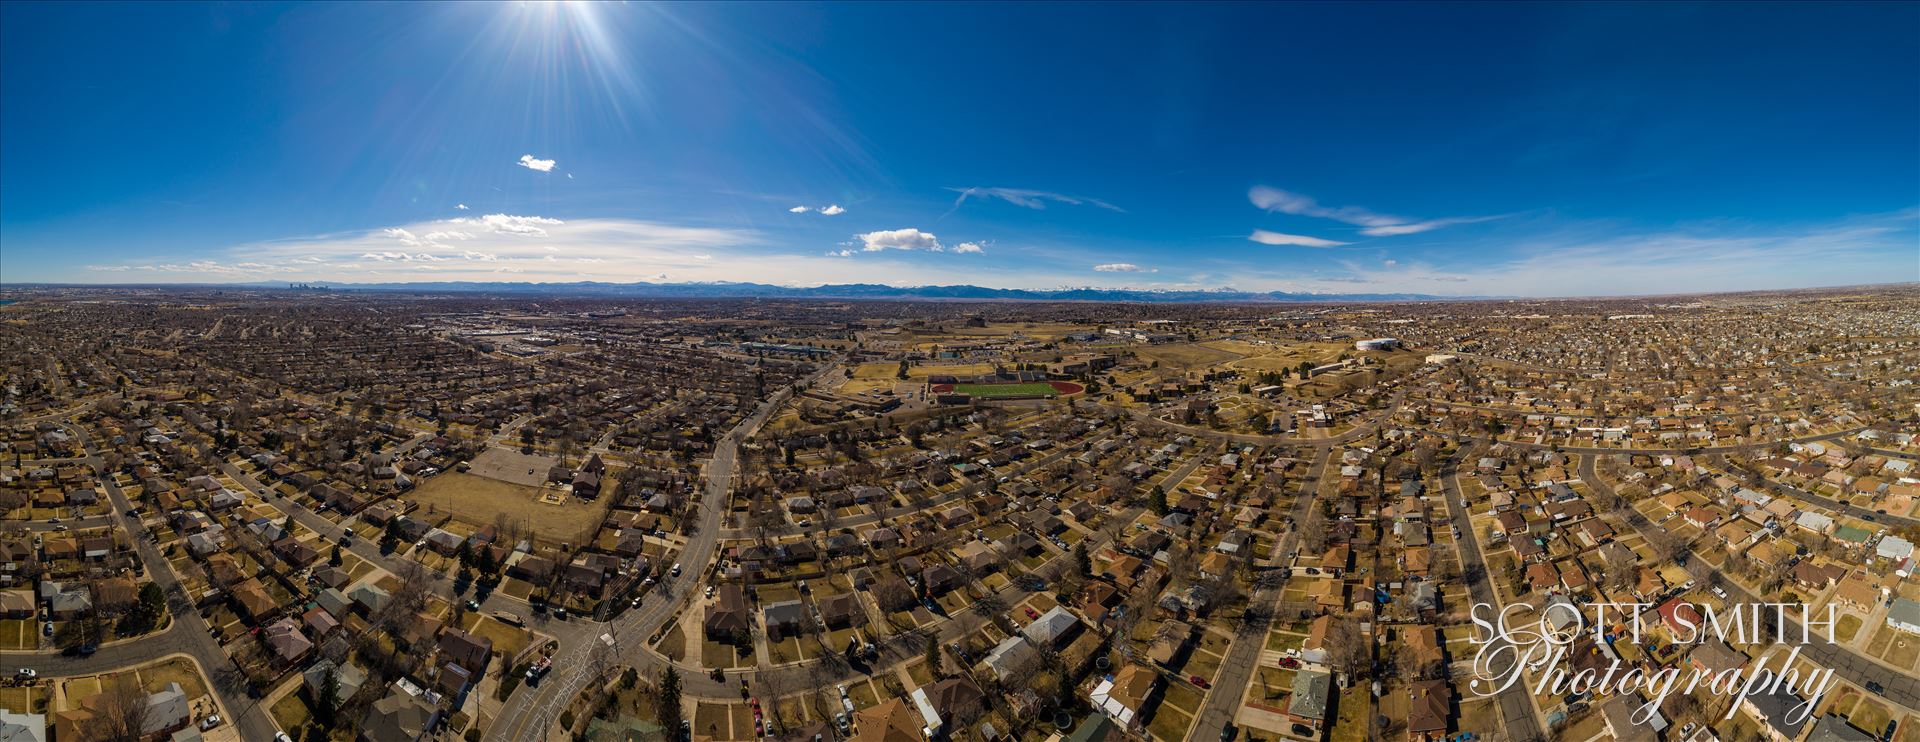 Panoramic aerial shot of Thornton, Colorado - A panoramic aerial photo of Thornton, Colorado, made up of 21 separate photos. by Scott Smith Photos